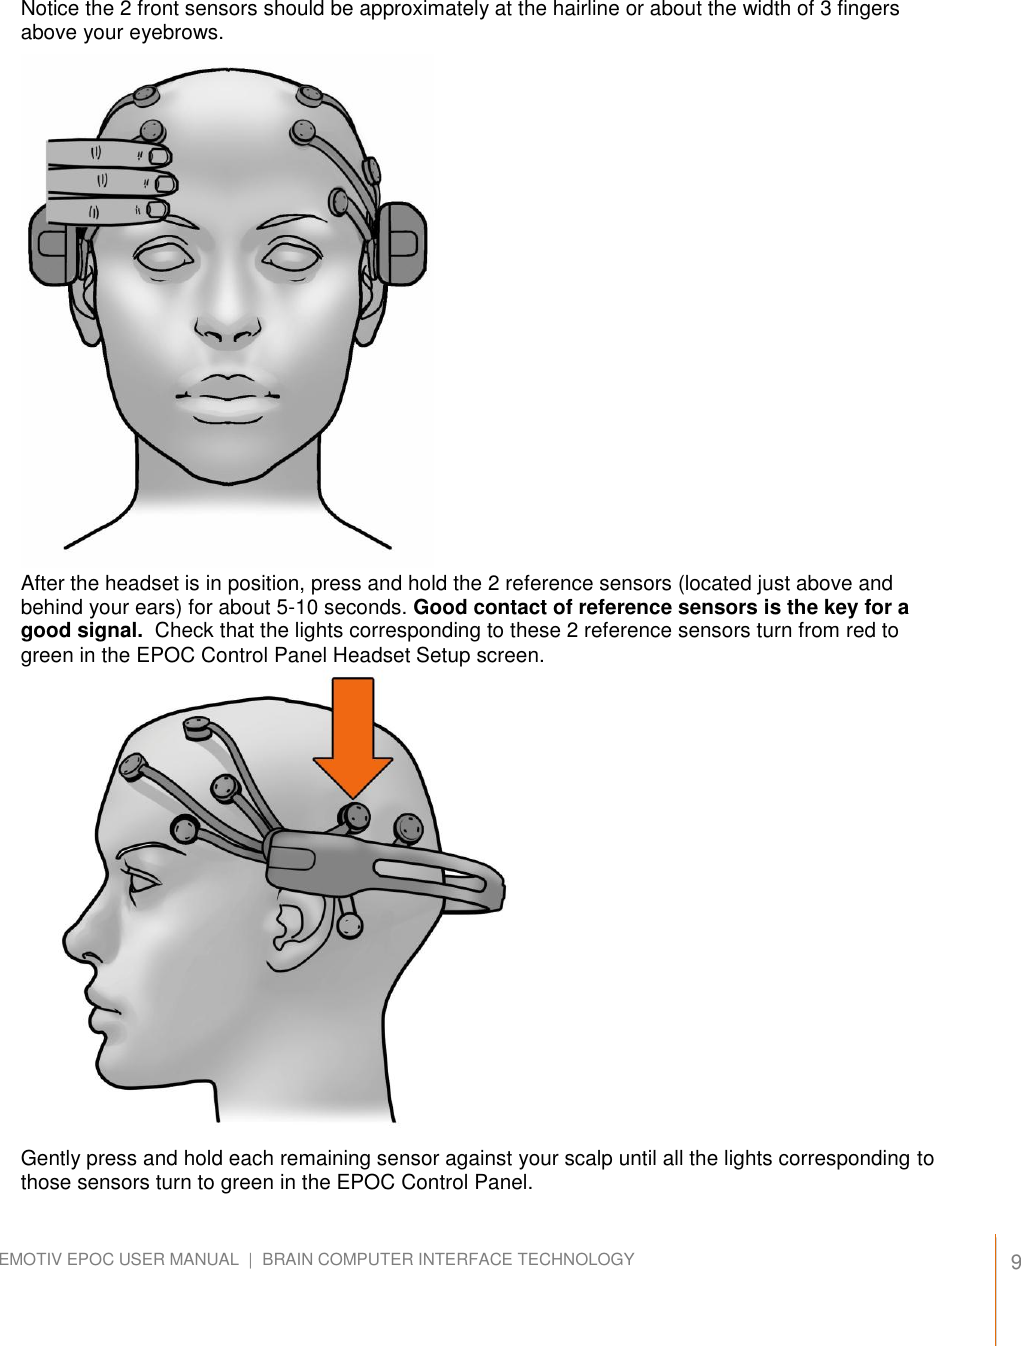   9 EMOTIV EPOC USER MANUAL  |  BRAIN COMPUTER INTERFACE TECHNOLOGY    Notice the 2 front sensors should be approximately at the hairline or about the width of 3 fingers above your eyebrows.                       After the headset is in position, press and hold the 2 reference sensors (located just above and behind your ears) for about 5-10 seconds. Good contact of reference sensors is the key for a good signal.  Check that the lights corresponding to these 2 reference sensors turn from red to green in the EPOC Control Panel Headset Setup screen.                     Gently press and hold each remaining sensor against your scalp until all the lights corresponding to those sensors turn to green in the EPOC Control Panel. 